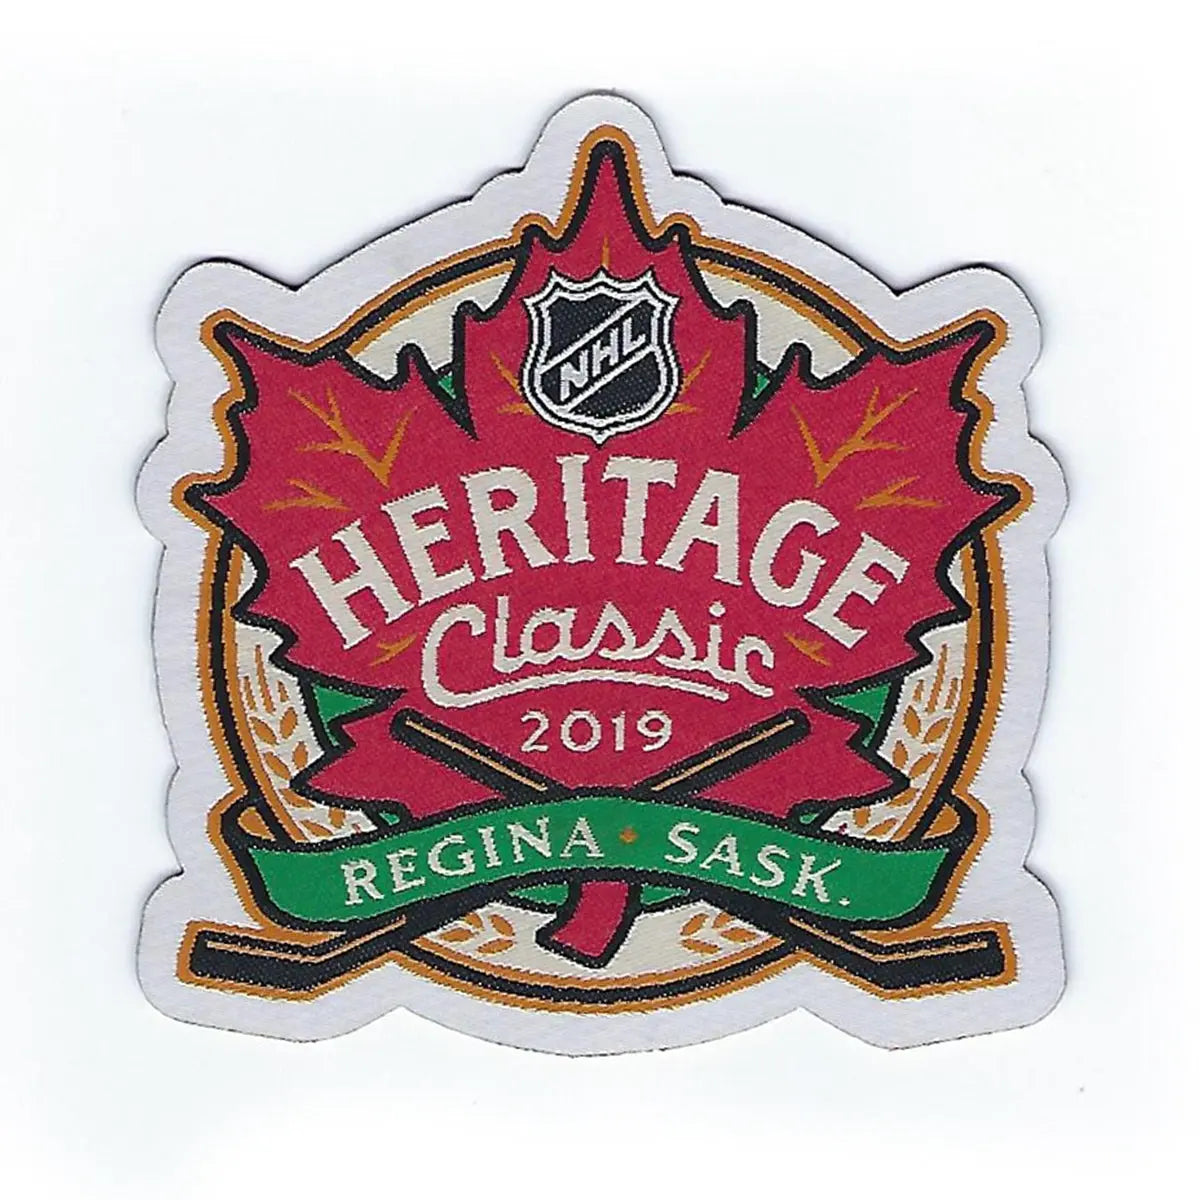 2019 NHL Heritage Classic Jersey Woven Patch Winnipeg Jets Calgary Flames (3 Inches) 